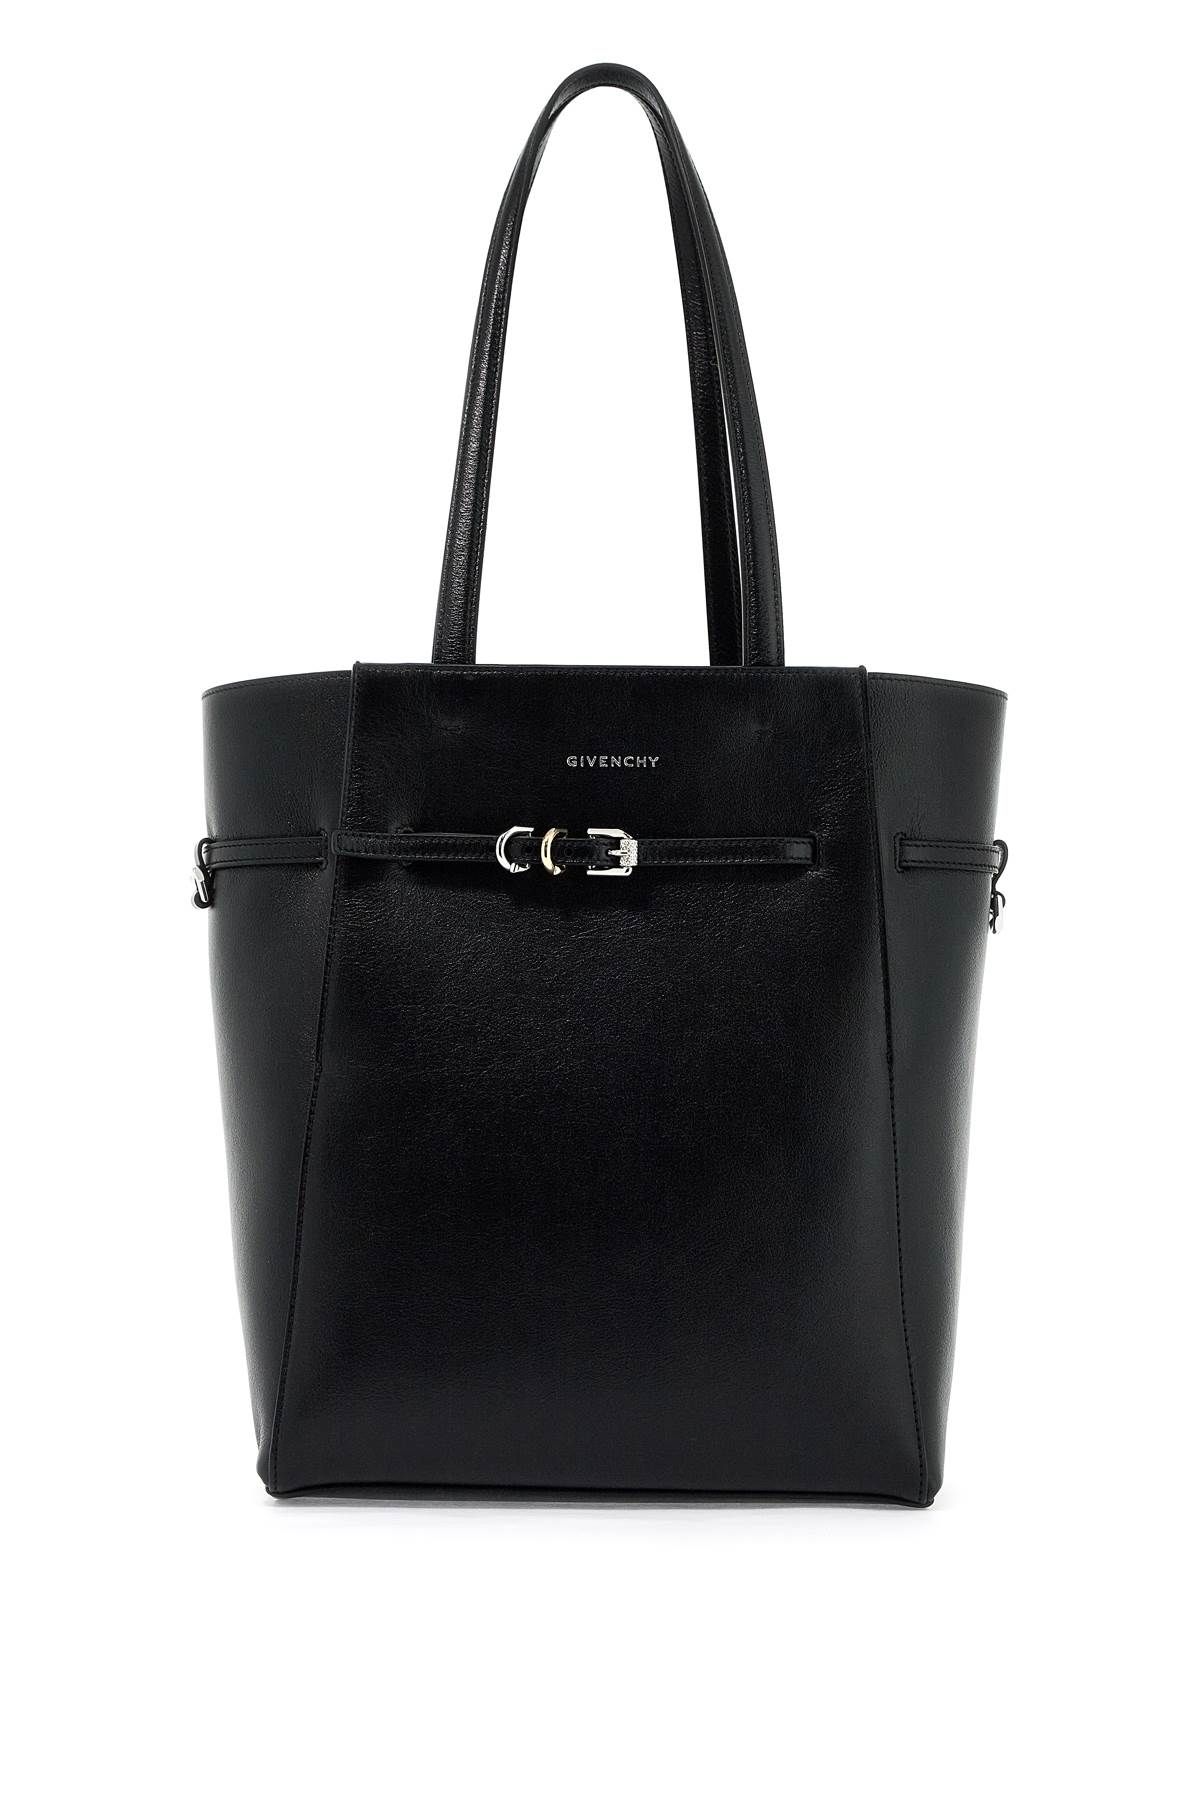 Givenchy Small Voyou Tote Bag In Black